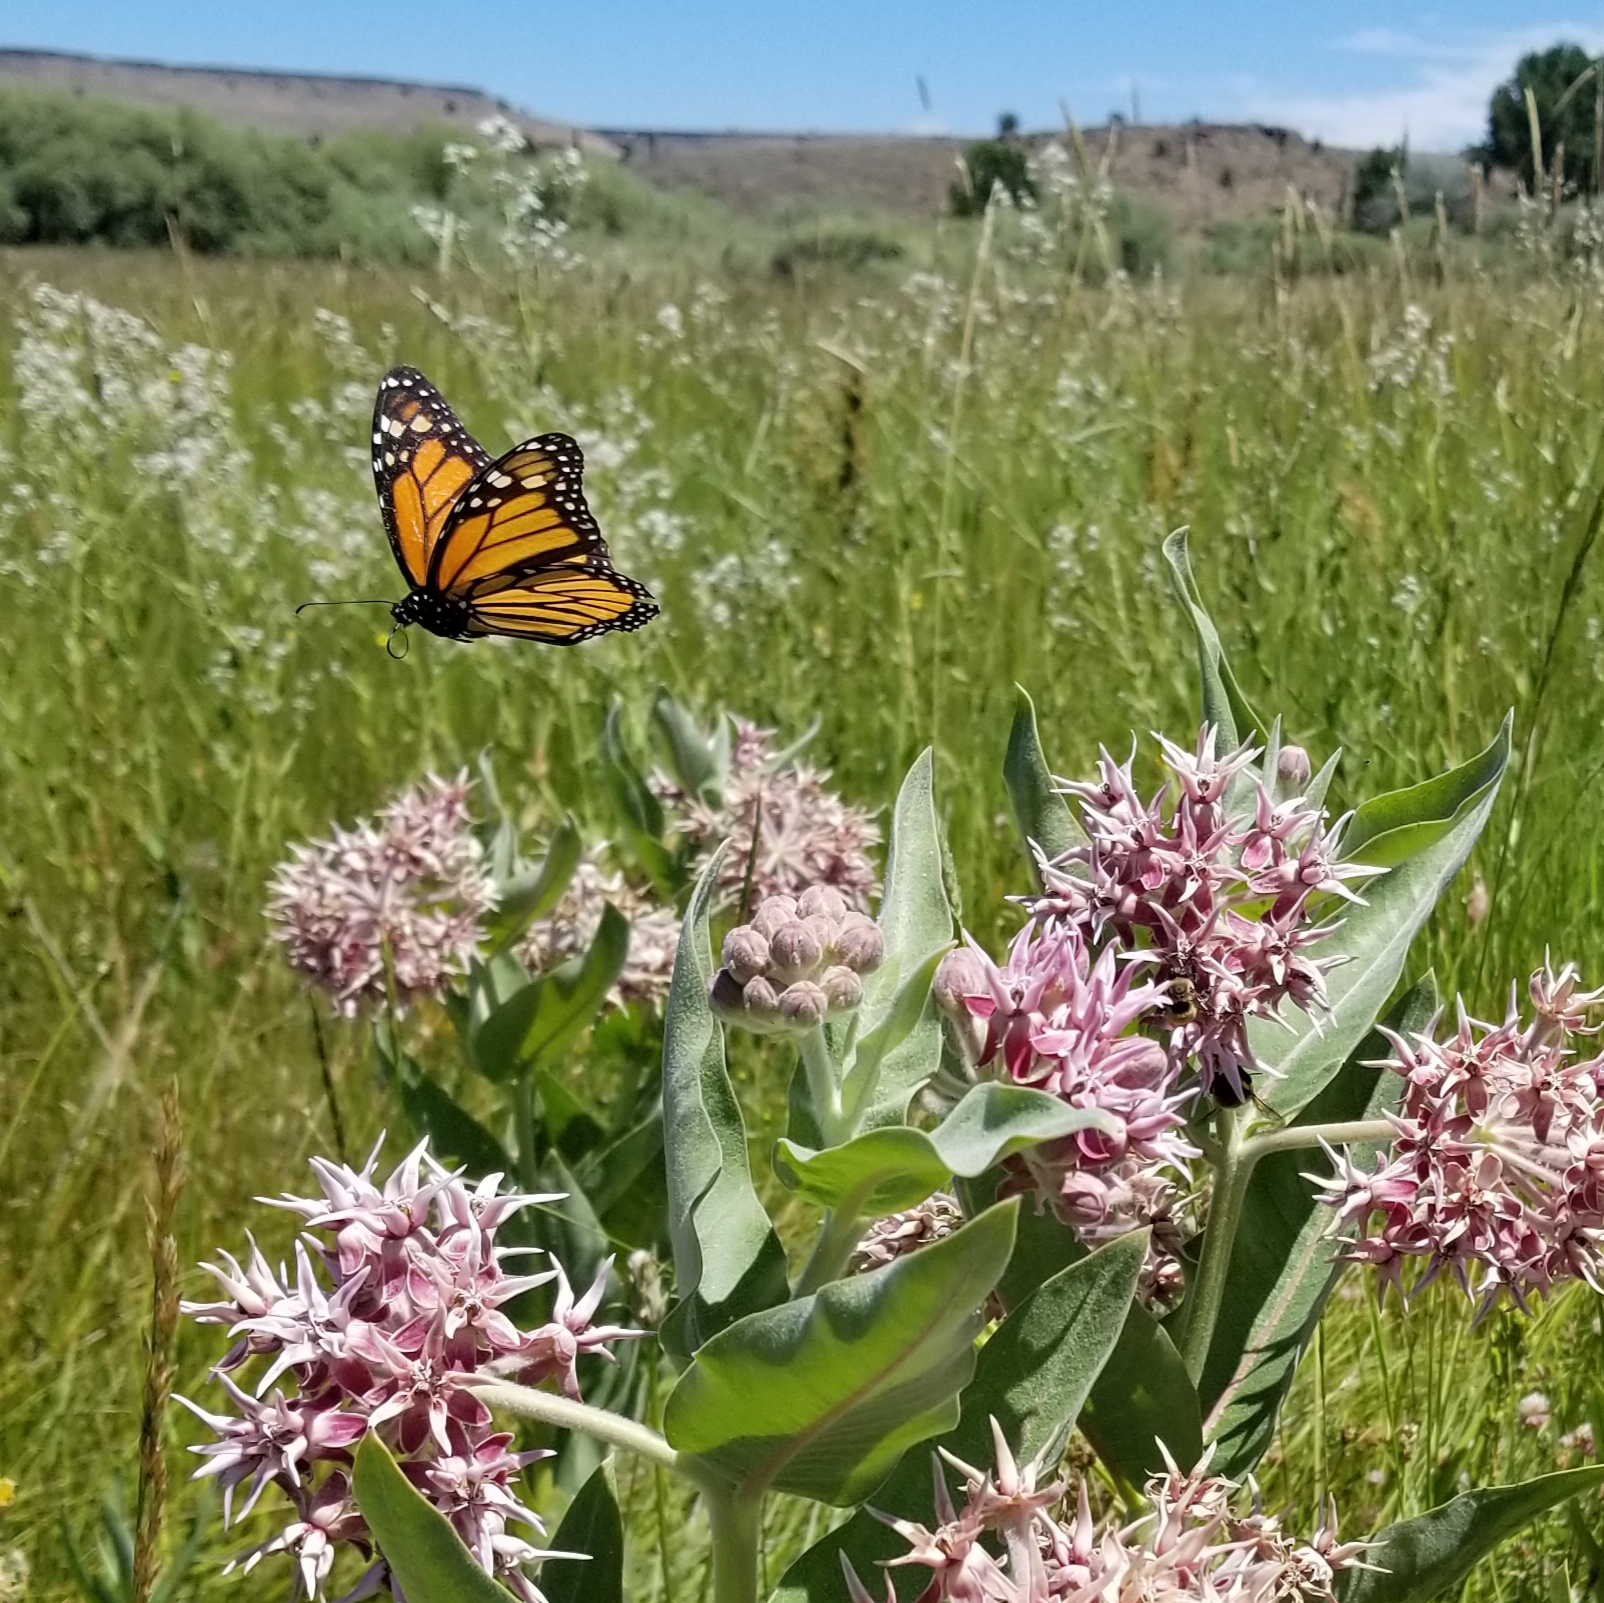 Monarch butterfly flying over showy milkweed.